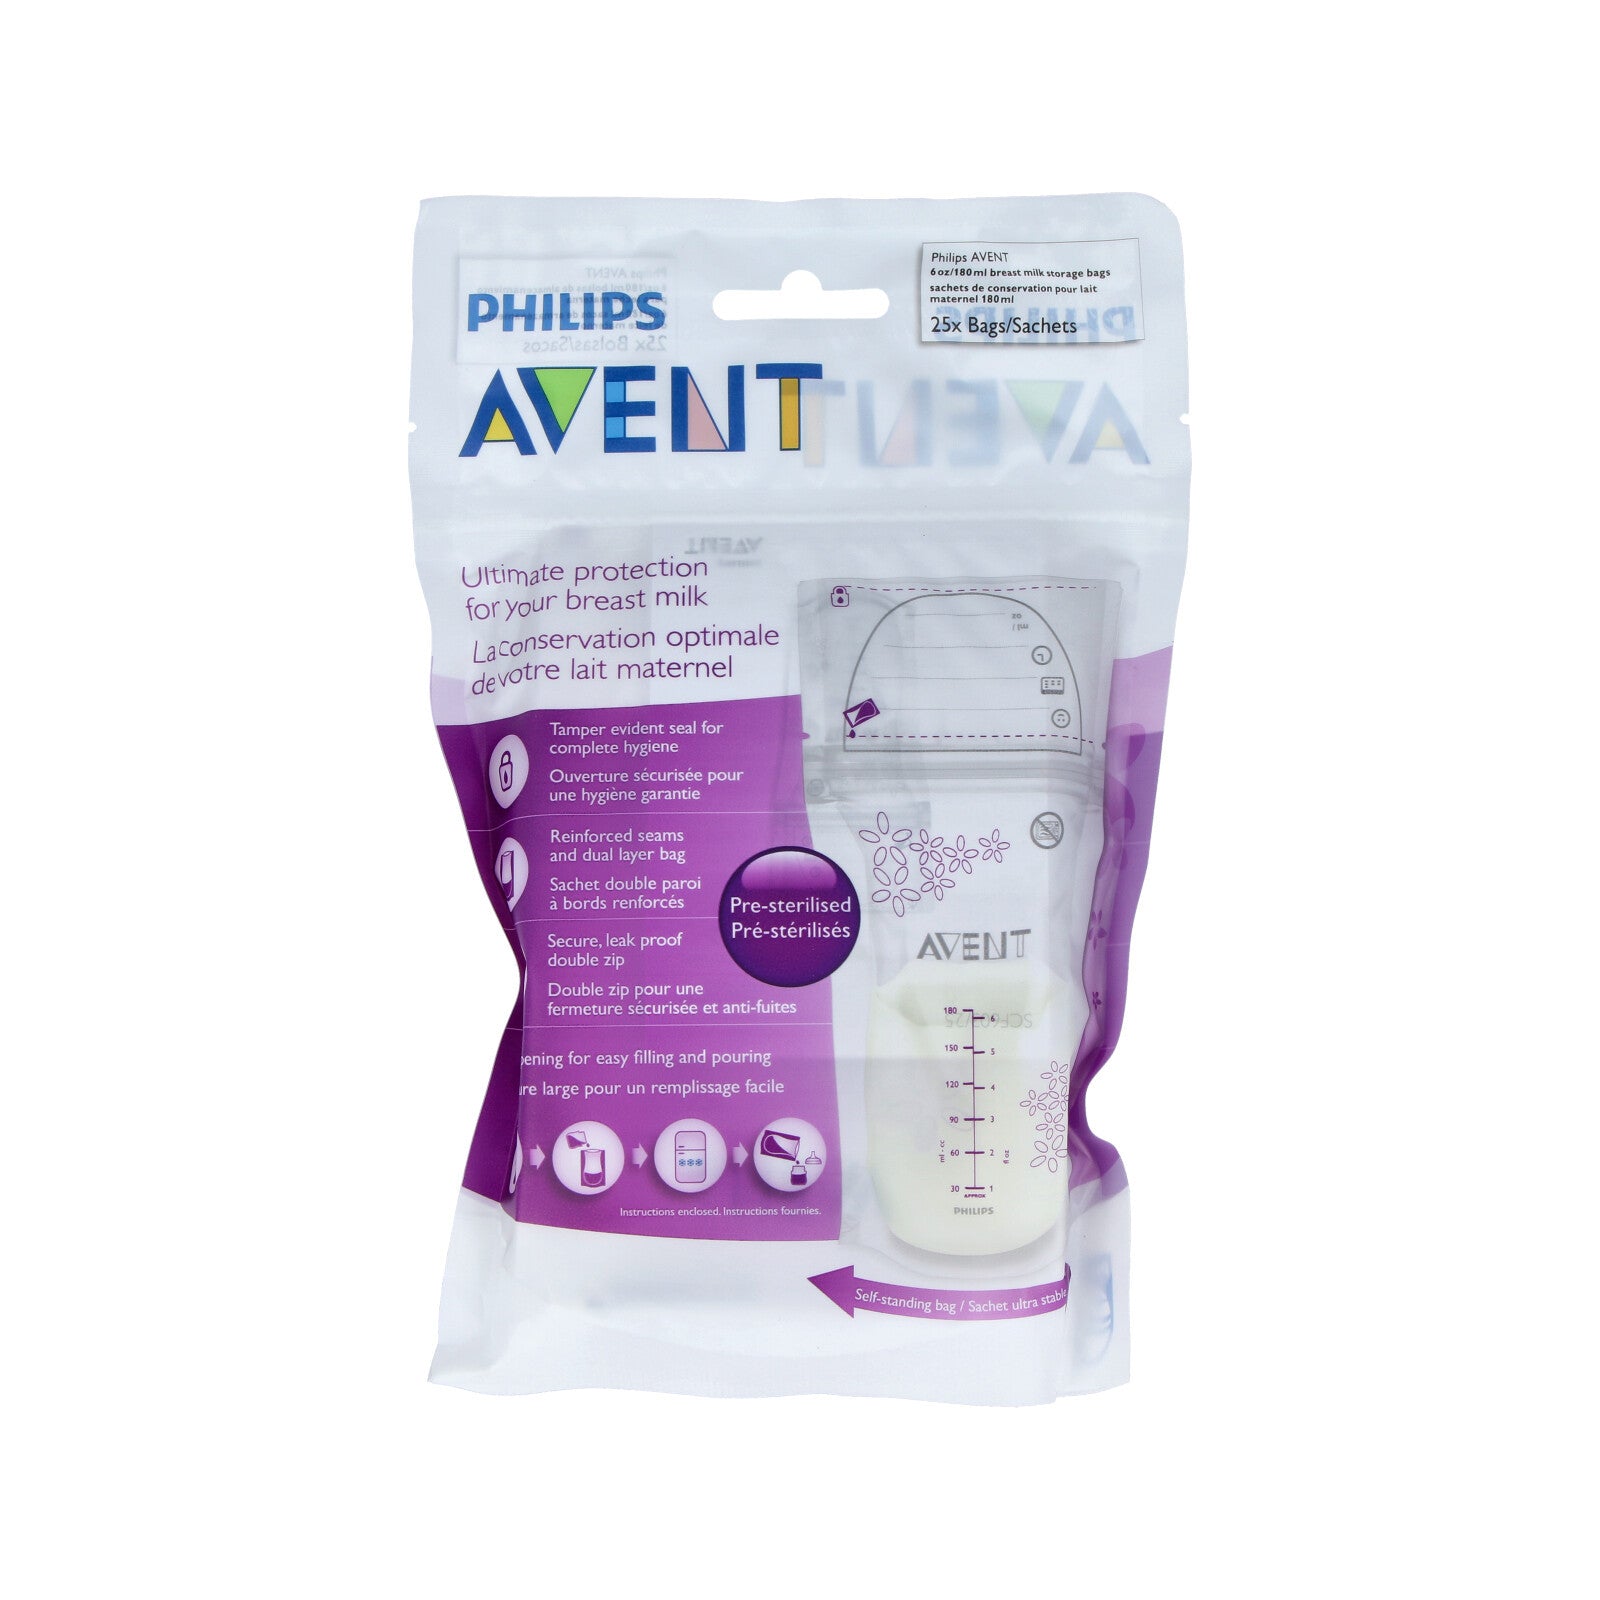 PHILIPS AVENT Ultimate Protection x25 Sachets